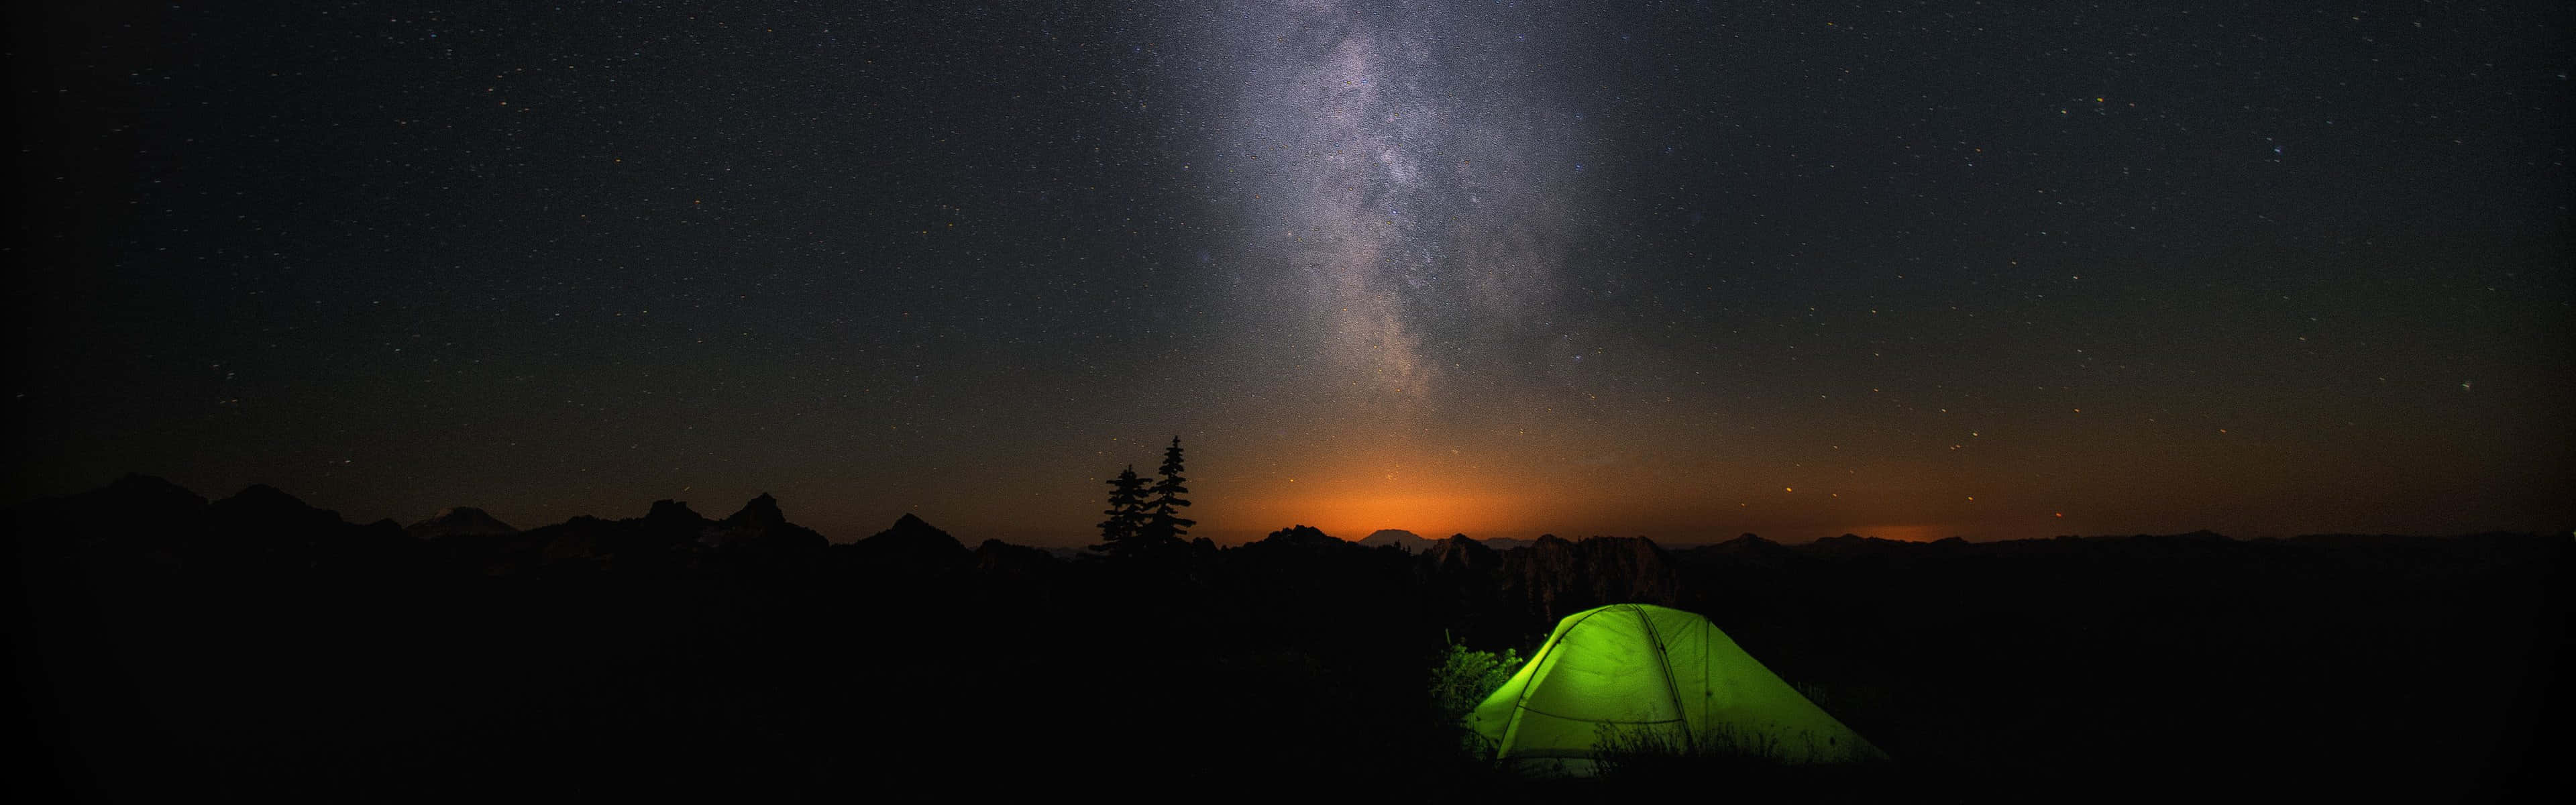 A Tent Is Lit Up Under The Milky